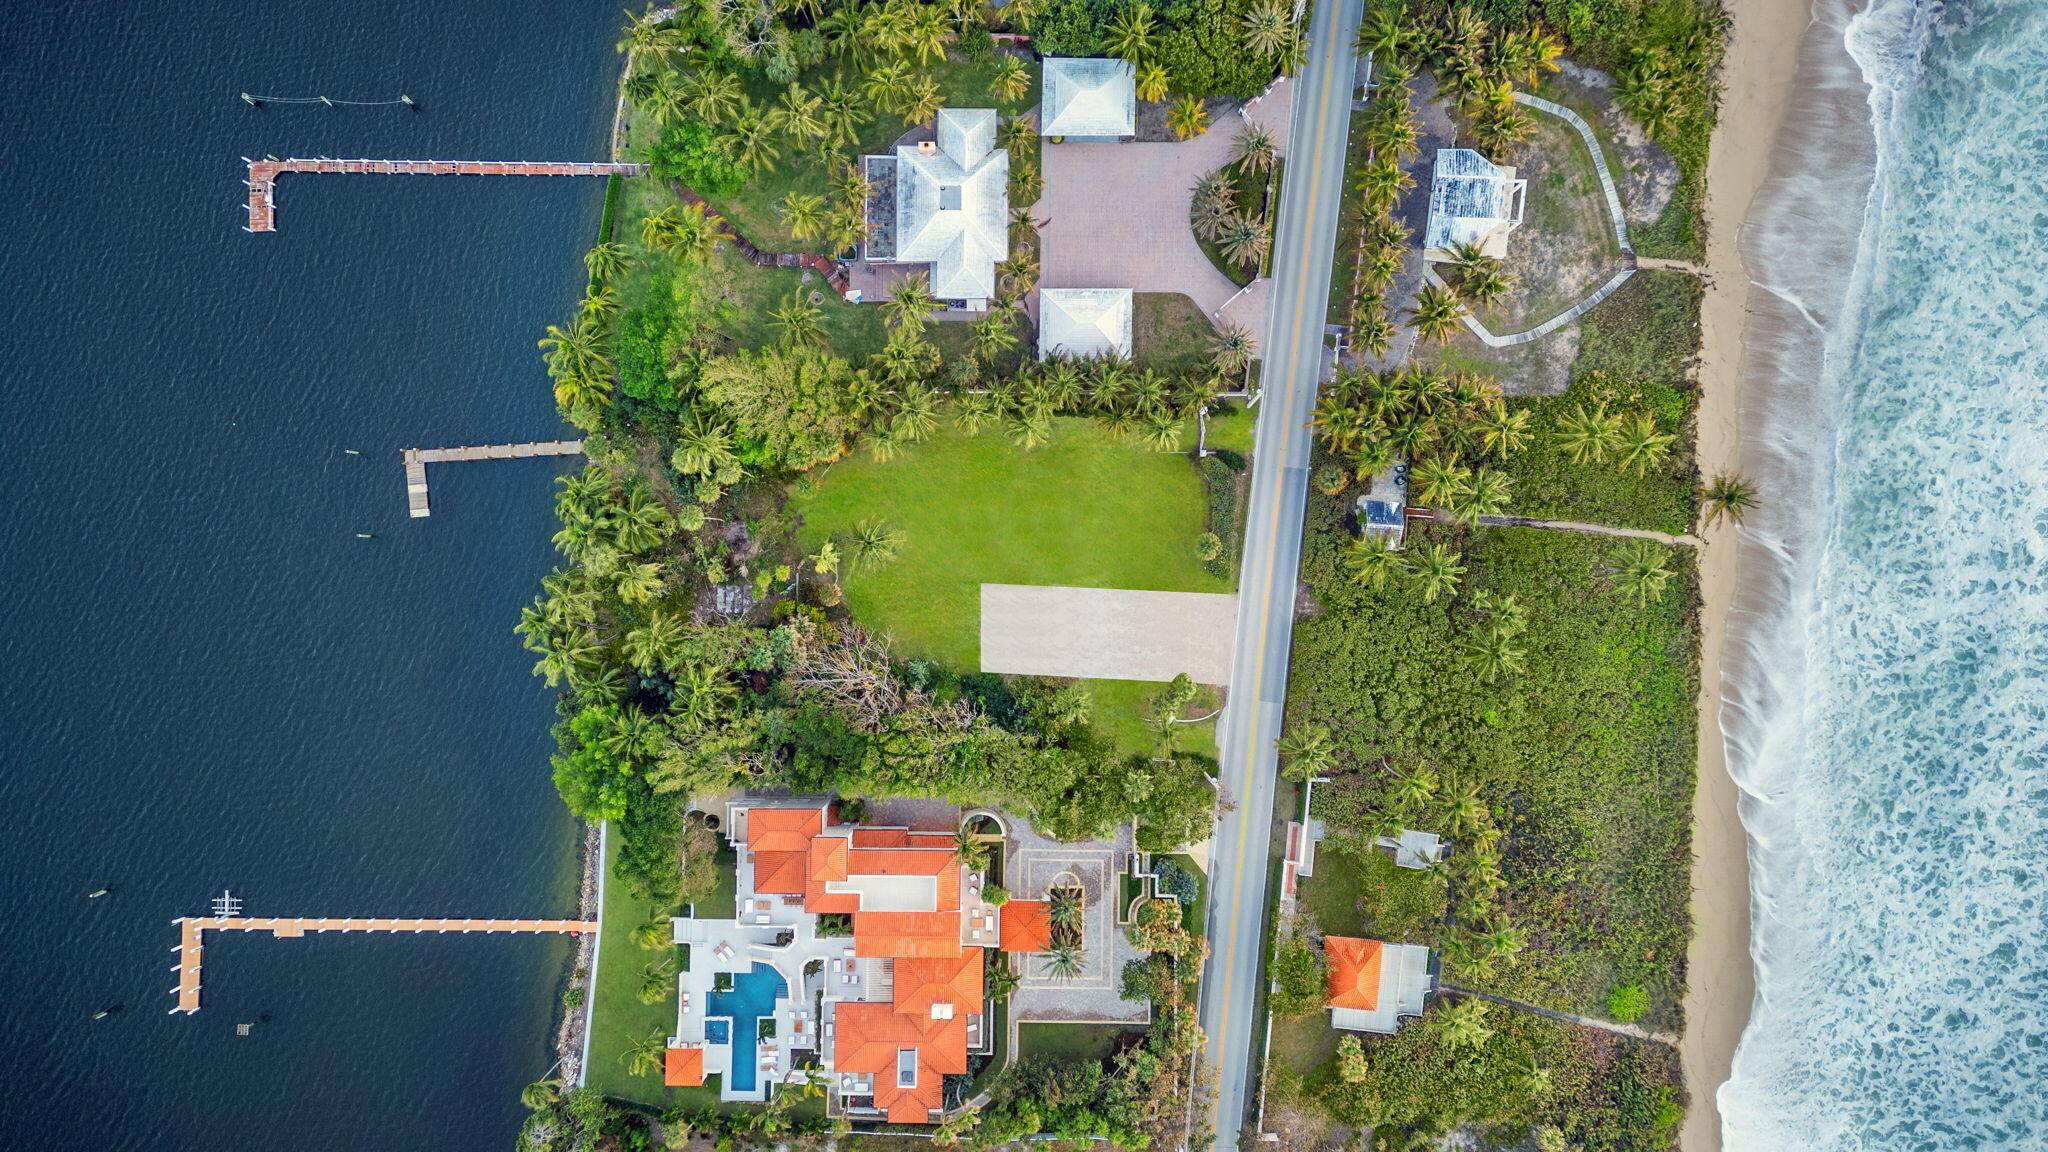 Welcome to 1820 S. Ocean Blvd, Manalapan, Florida an exceptional piece of vacant land that promises a truly unparalleled living experience.